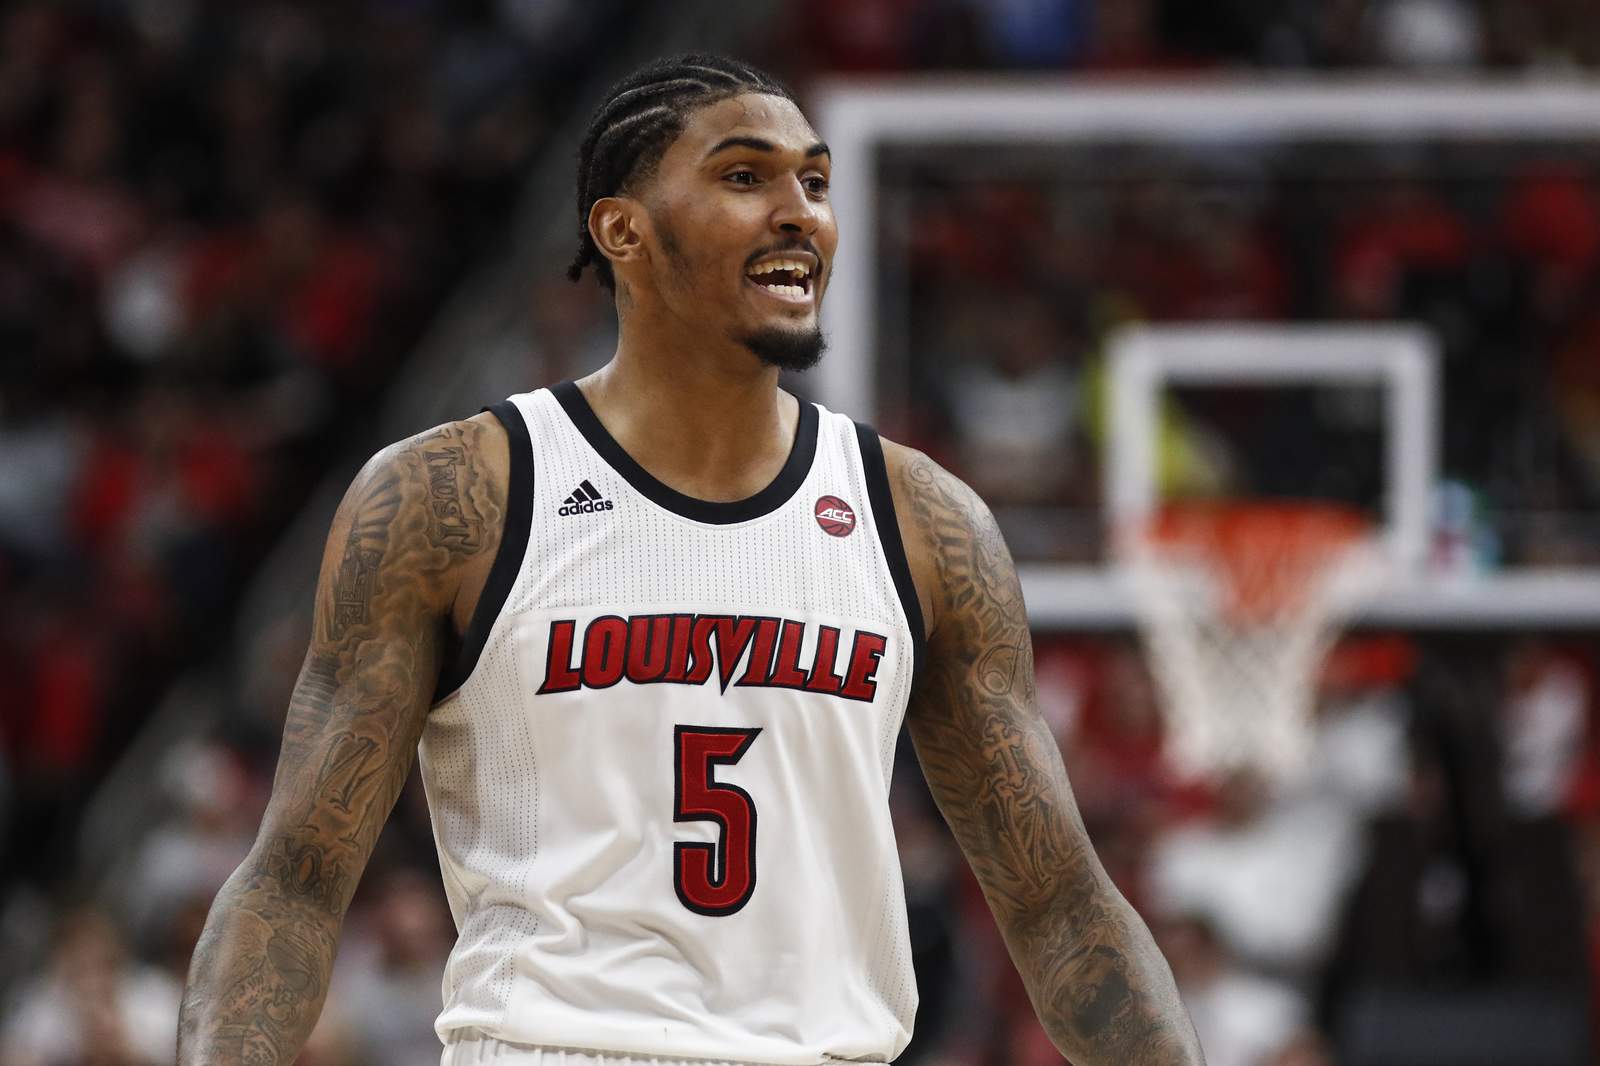 The Latest: Louisville cancels game after positive test